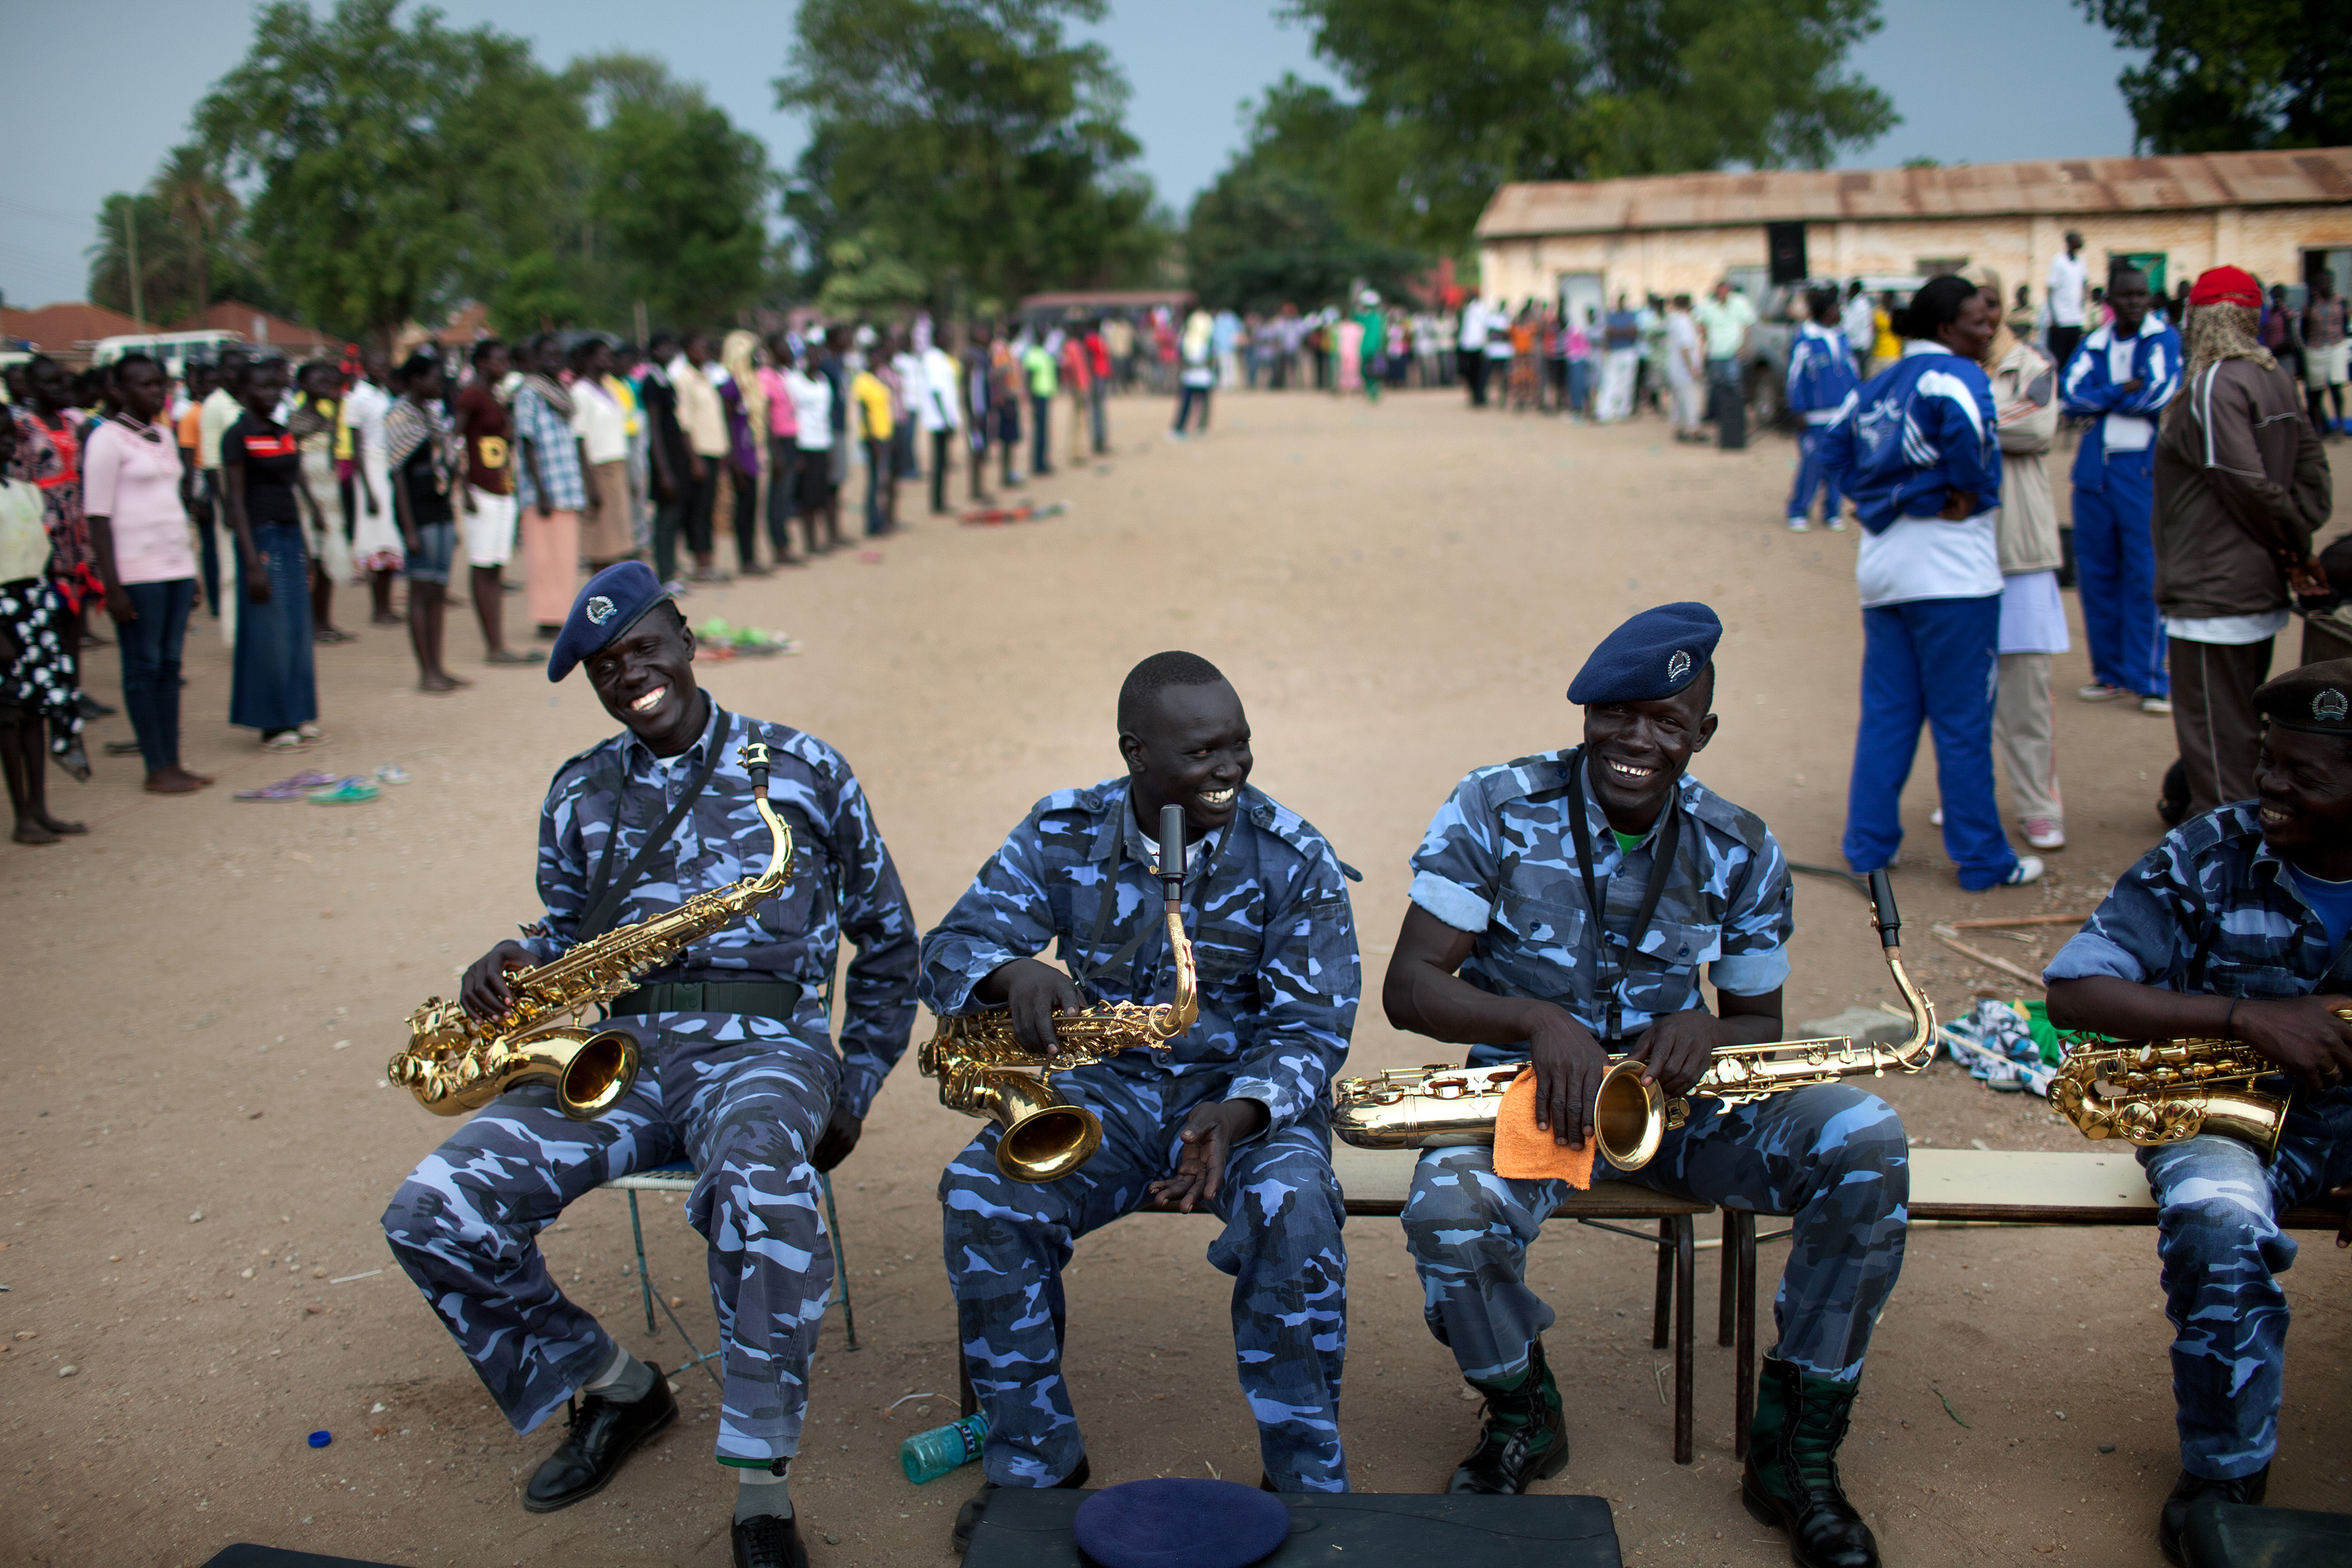 On a continent where crises dominate foreign news coverage, the founding of South Sudan, in 2011 after the loss of two million lives, is cause for celebration